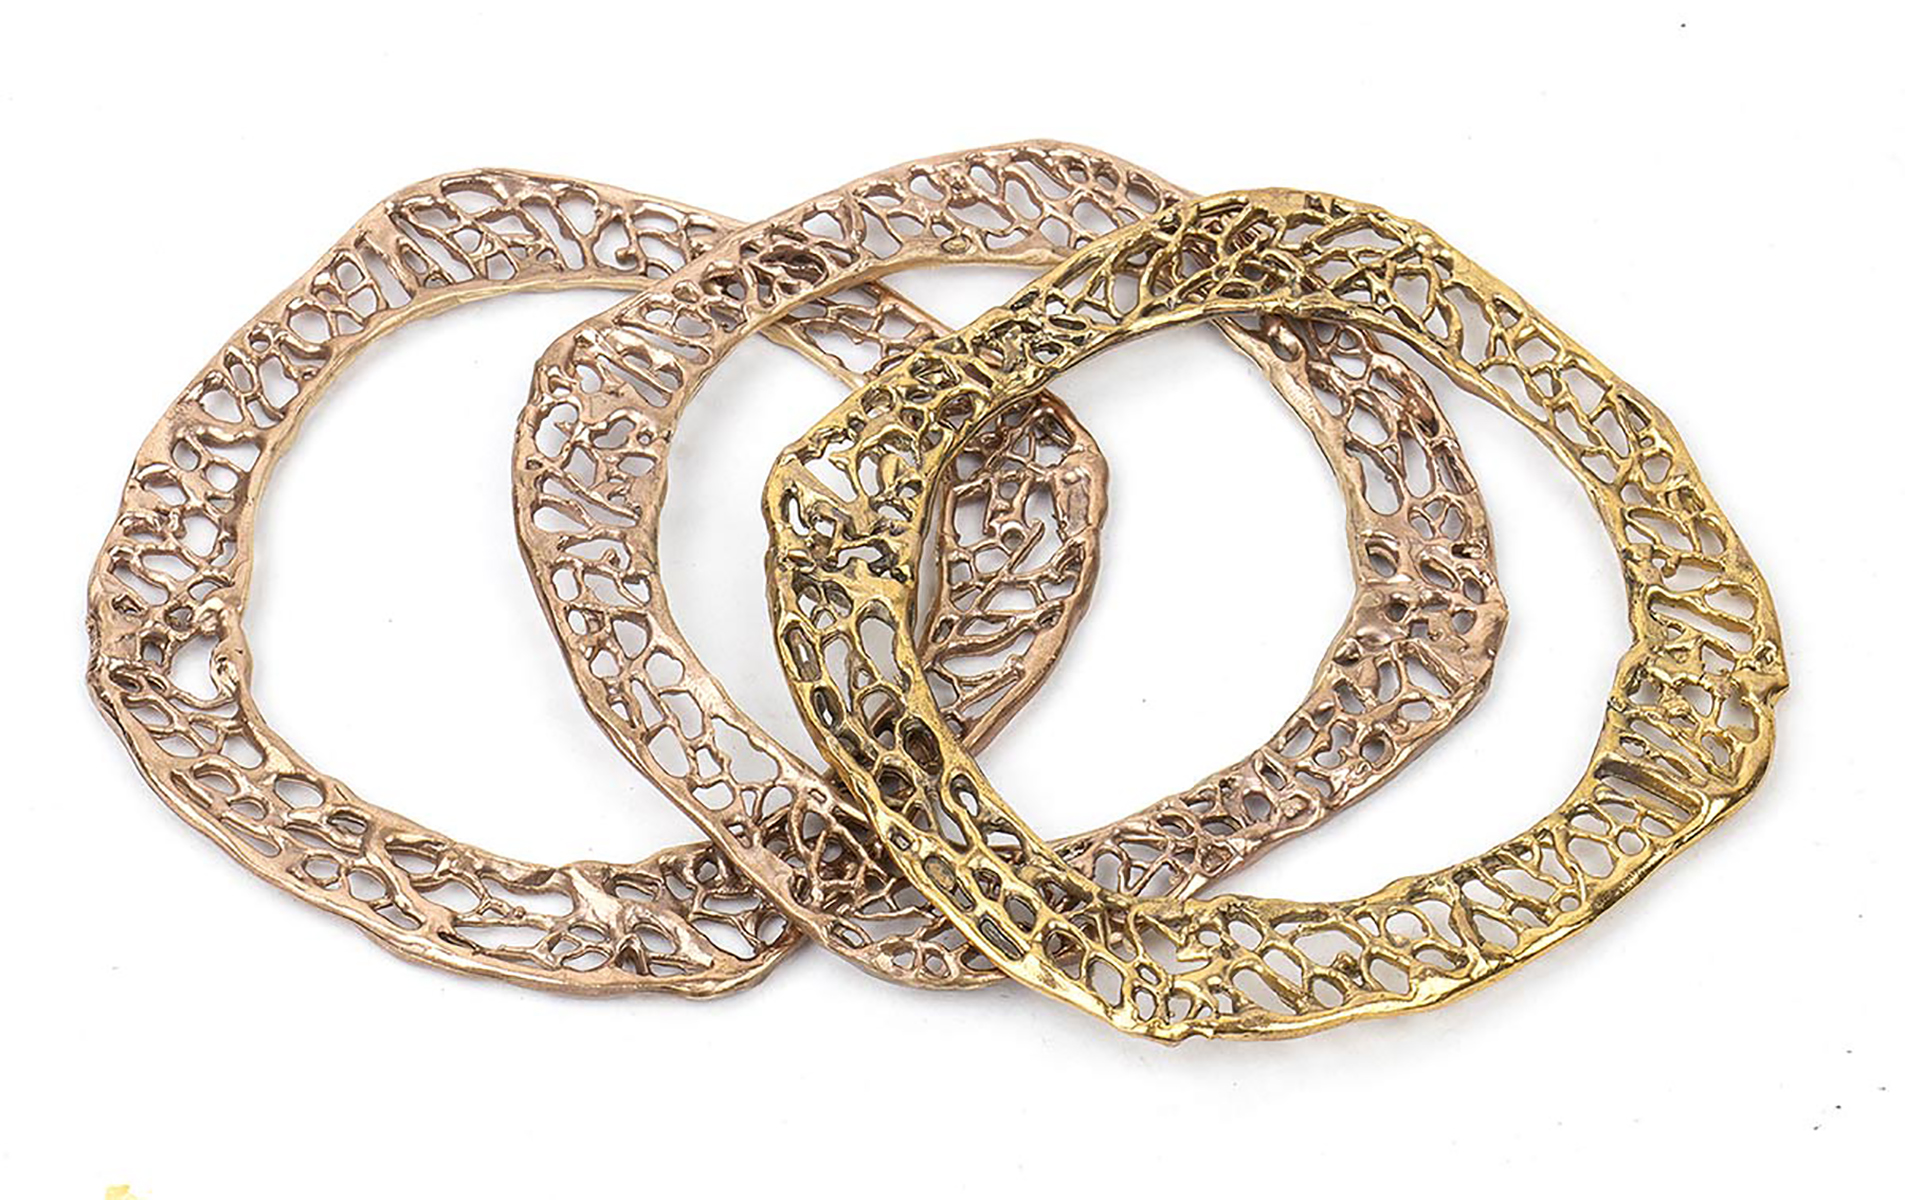 THREE BRONZE BRACELETS WITH YELLOW AND PINK 18 KT GOLD PLATING The cast bronze element represents